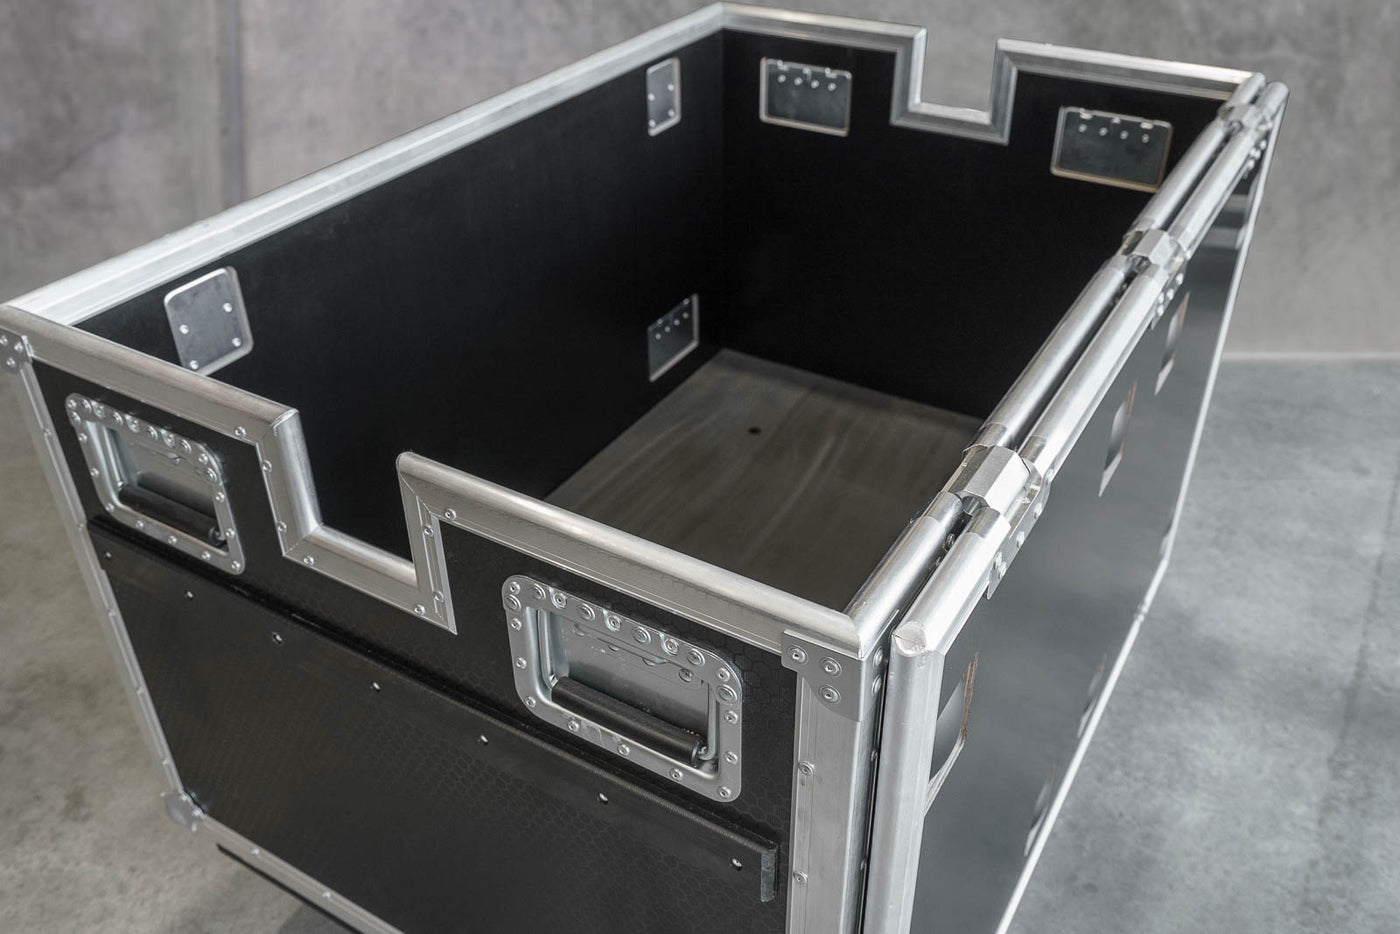 Inside the 48 x 30 Tall Cadillac Case